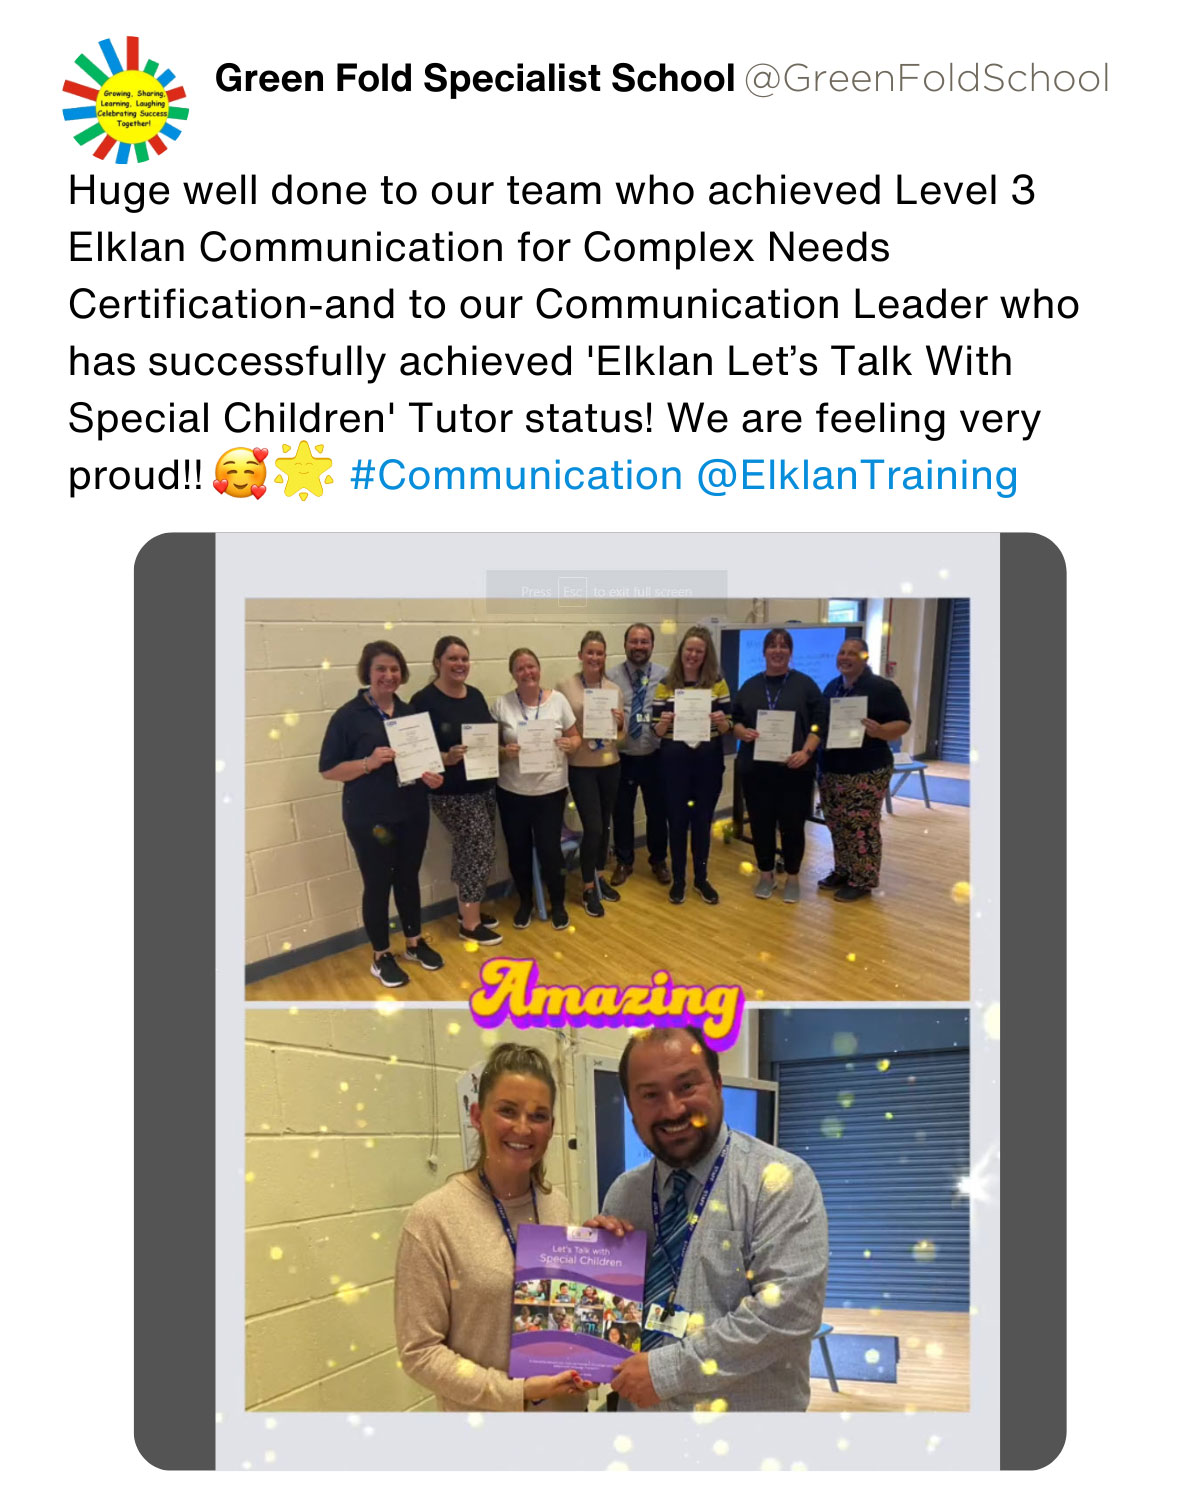 Green Fold Specialist School: Huge well done to our team who achieved Level 3 Elklan Communication for Complex Needs Certification - and to our Communication Leader who has successfully achieved 'Elklan Let's Talk With Special Children' Tutor status! We are very proud!!